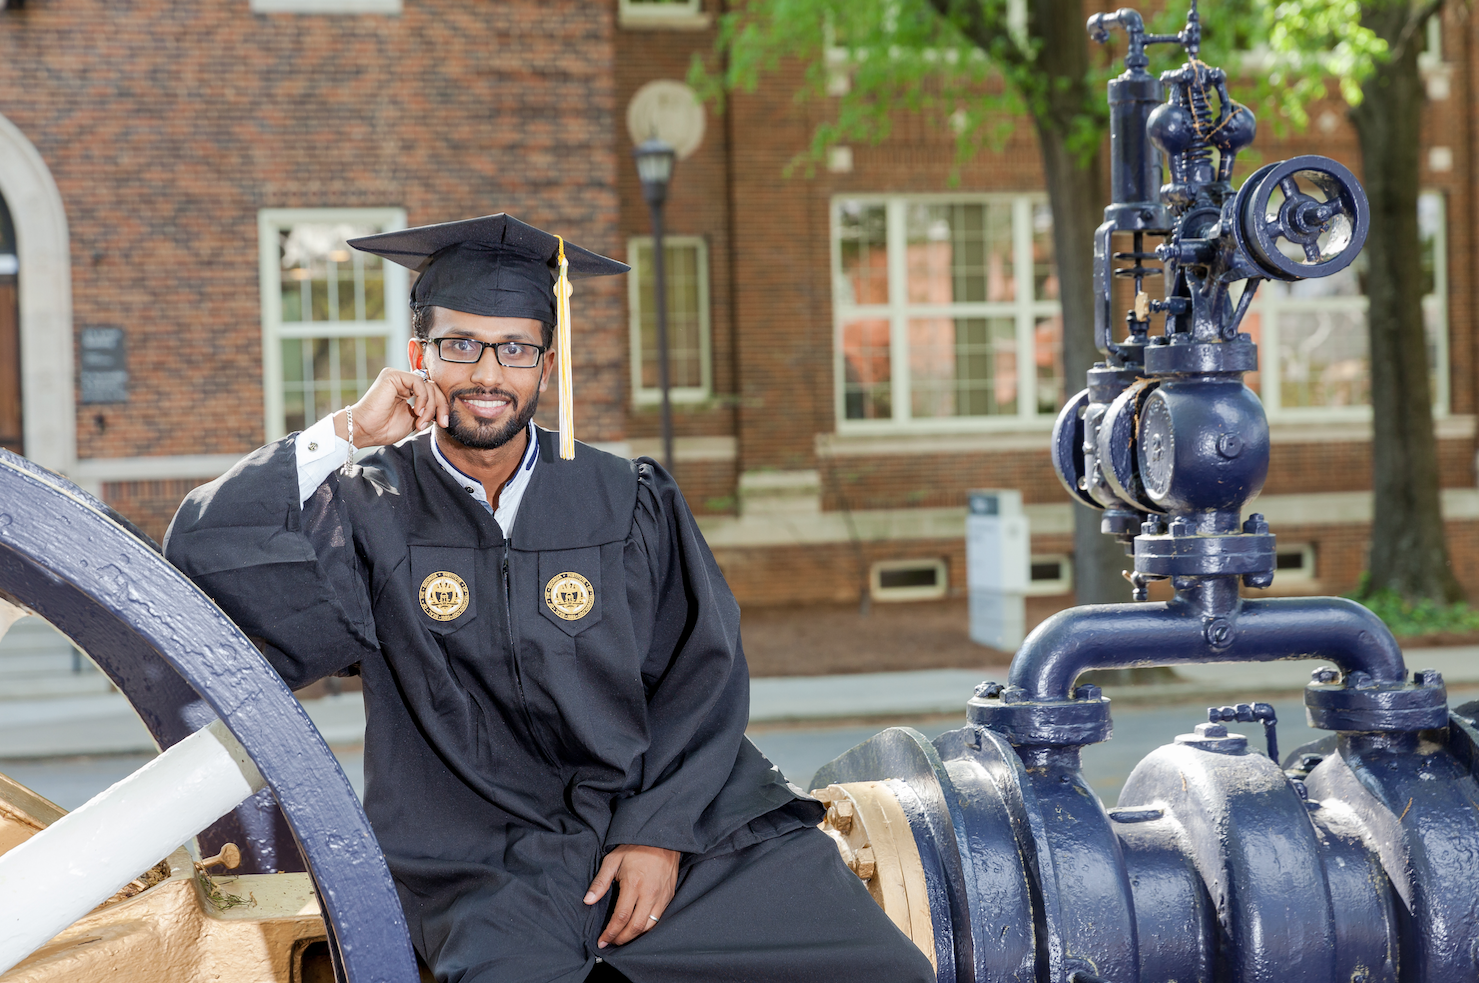 Despite facing personal challenges, Mohammed Washim is earning his degree from Georgia Tech after a decade-long journey.